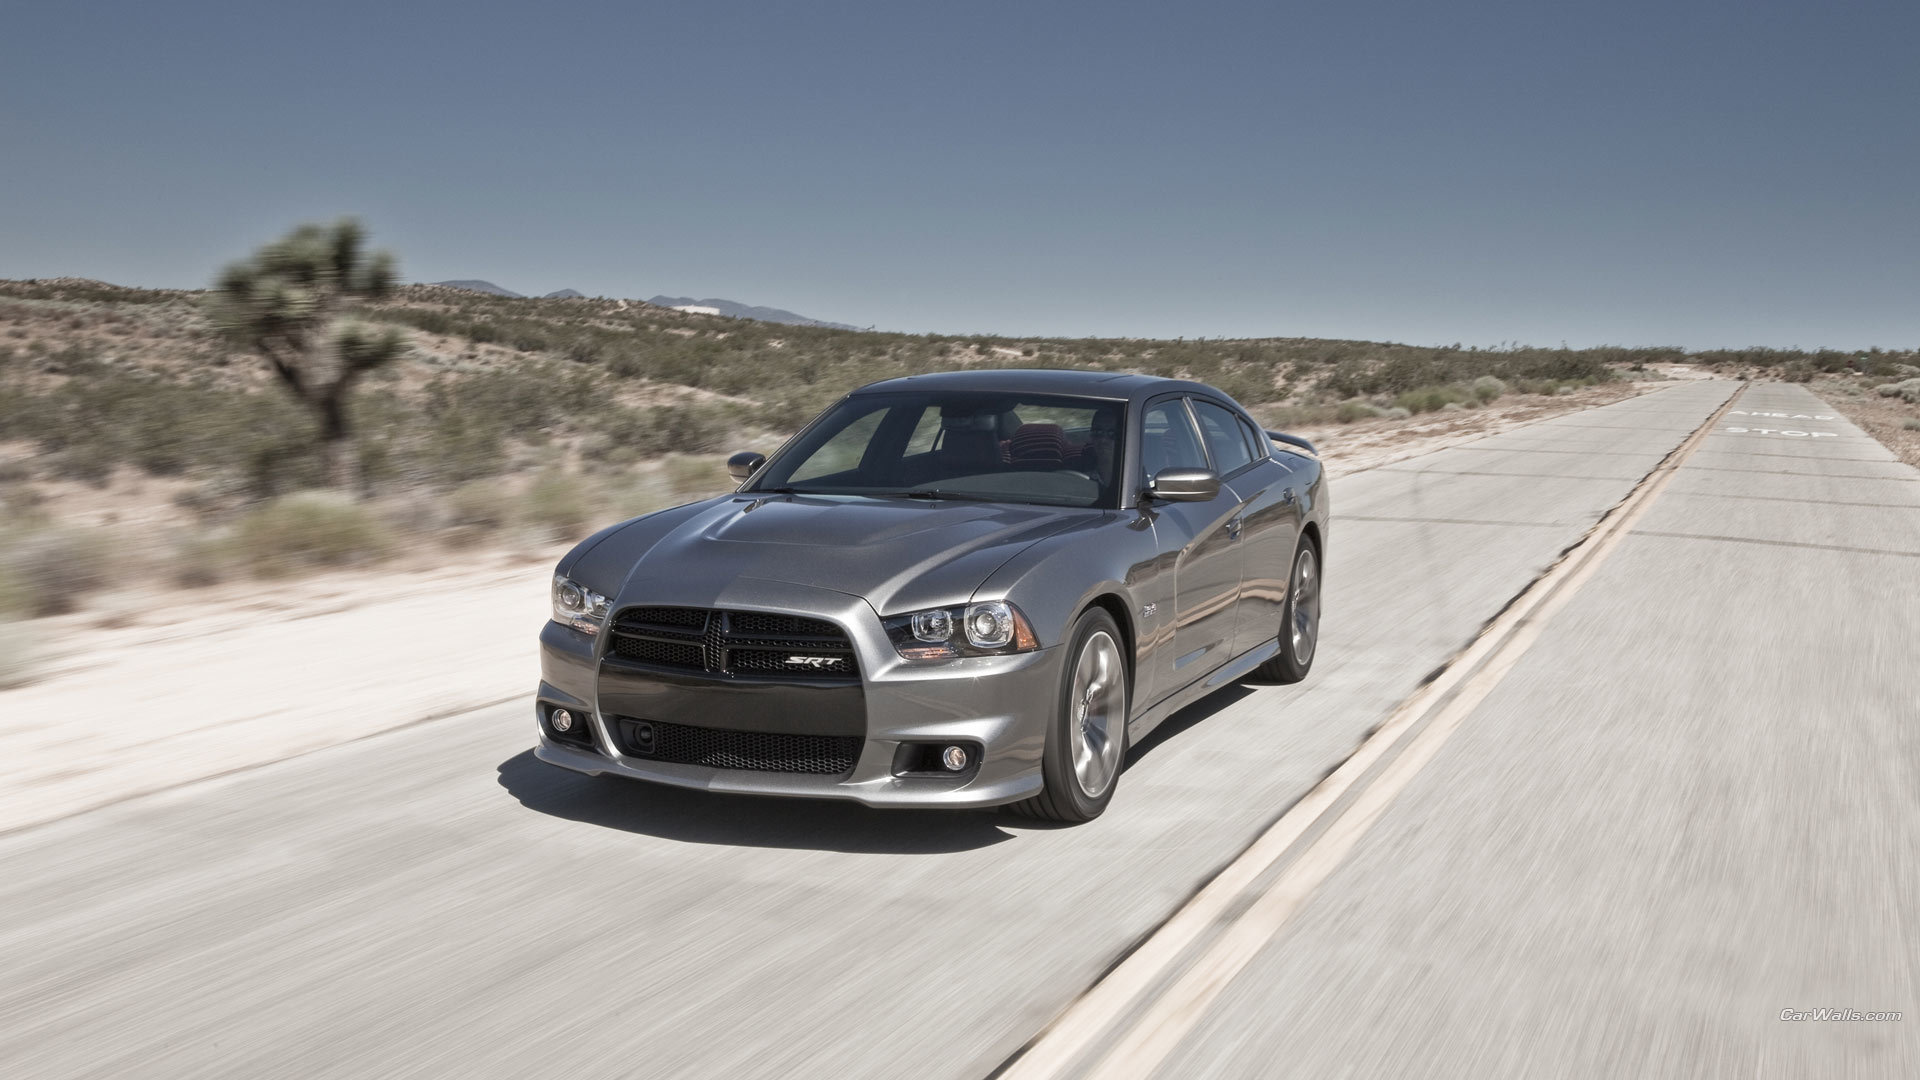 Best Dodge Charger Srt8 background ID:277923 for High Resolution 1080p PC